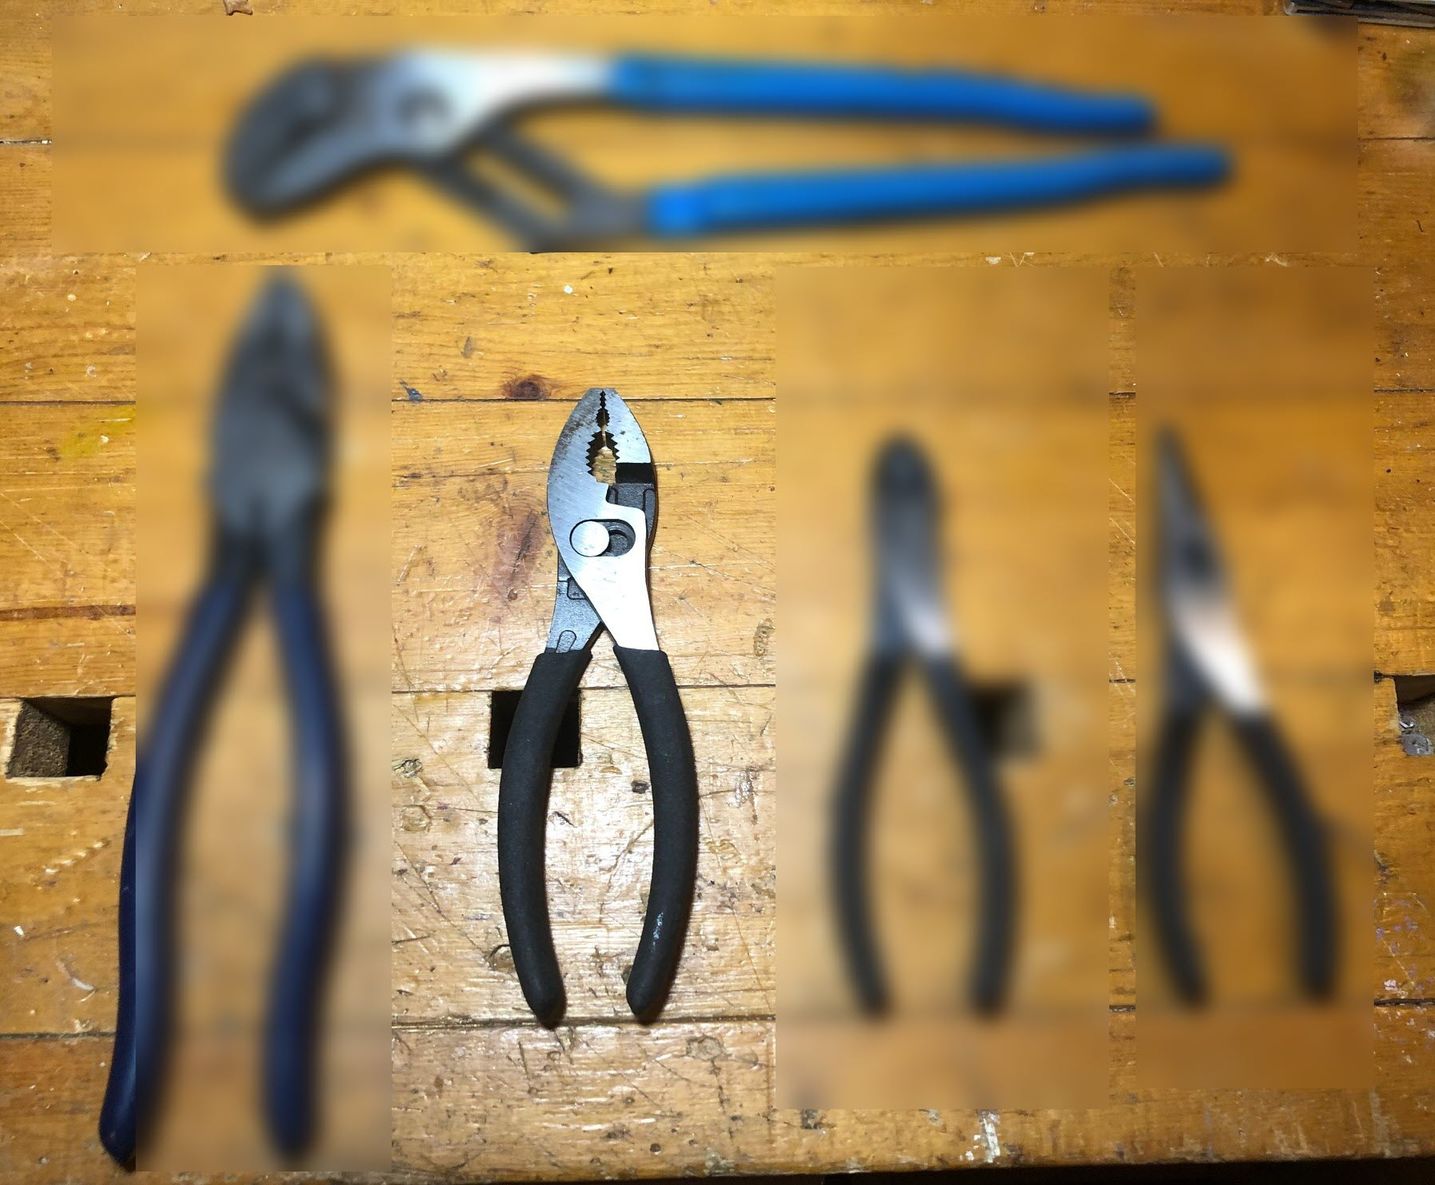 Craftsman slip joint pliers second from the left